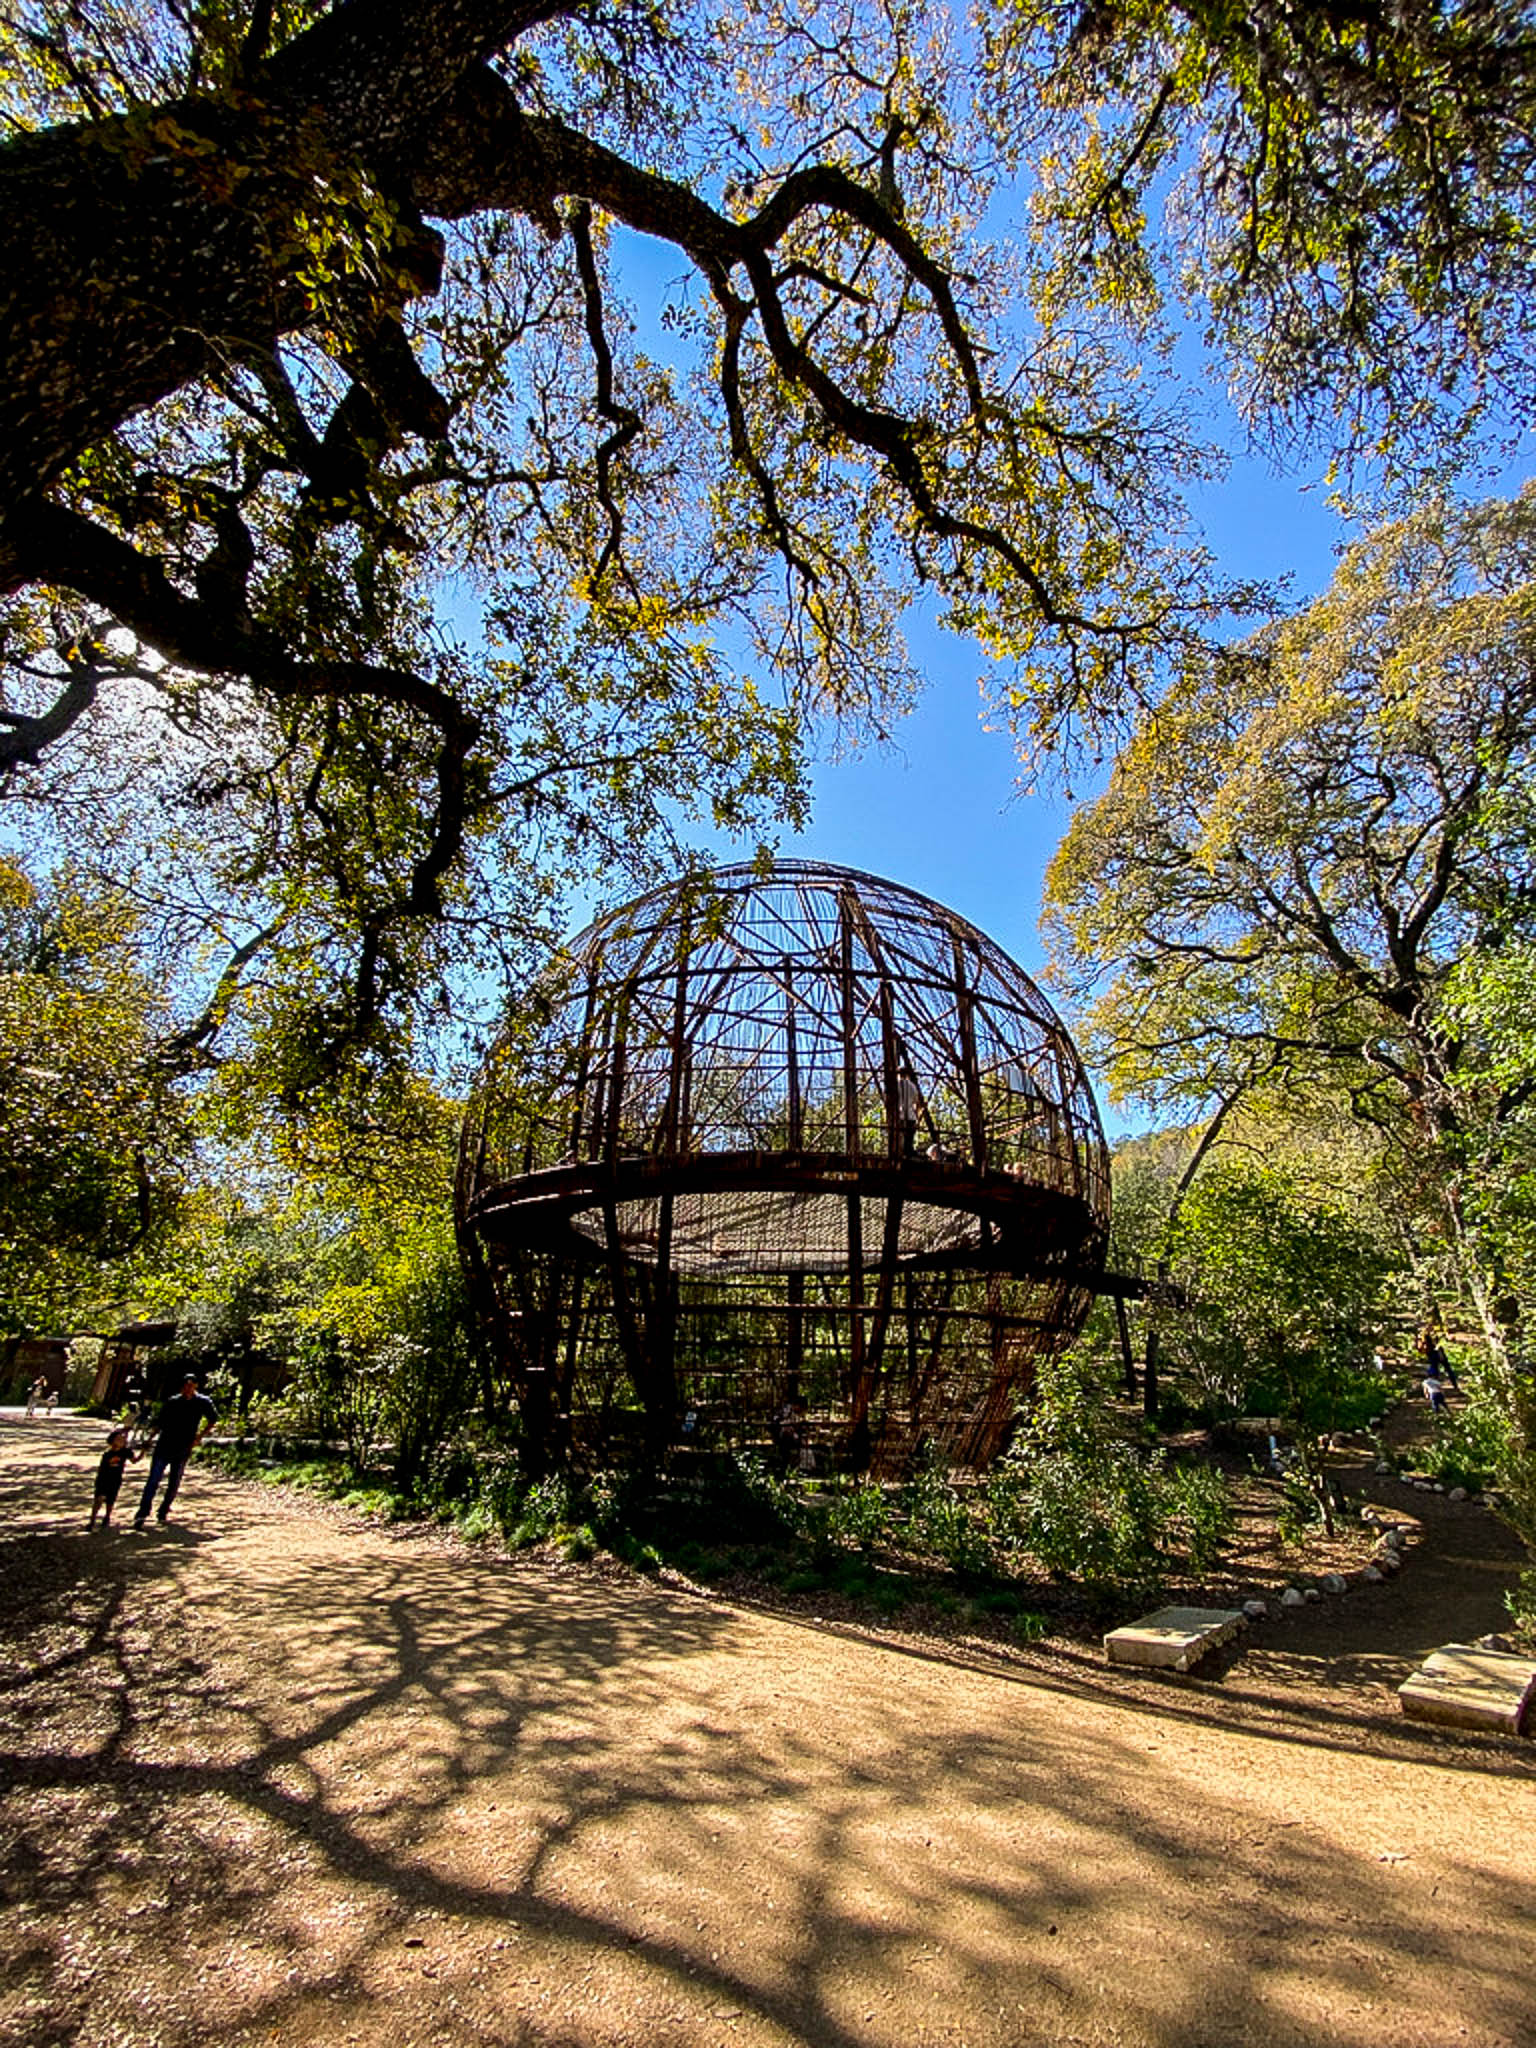 PEASE PARK - 101 free things to do in ATX!